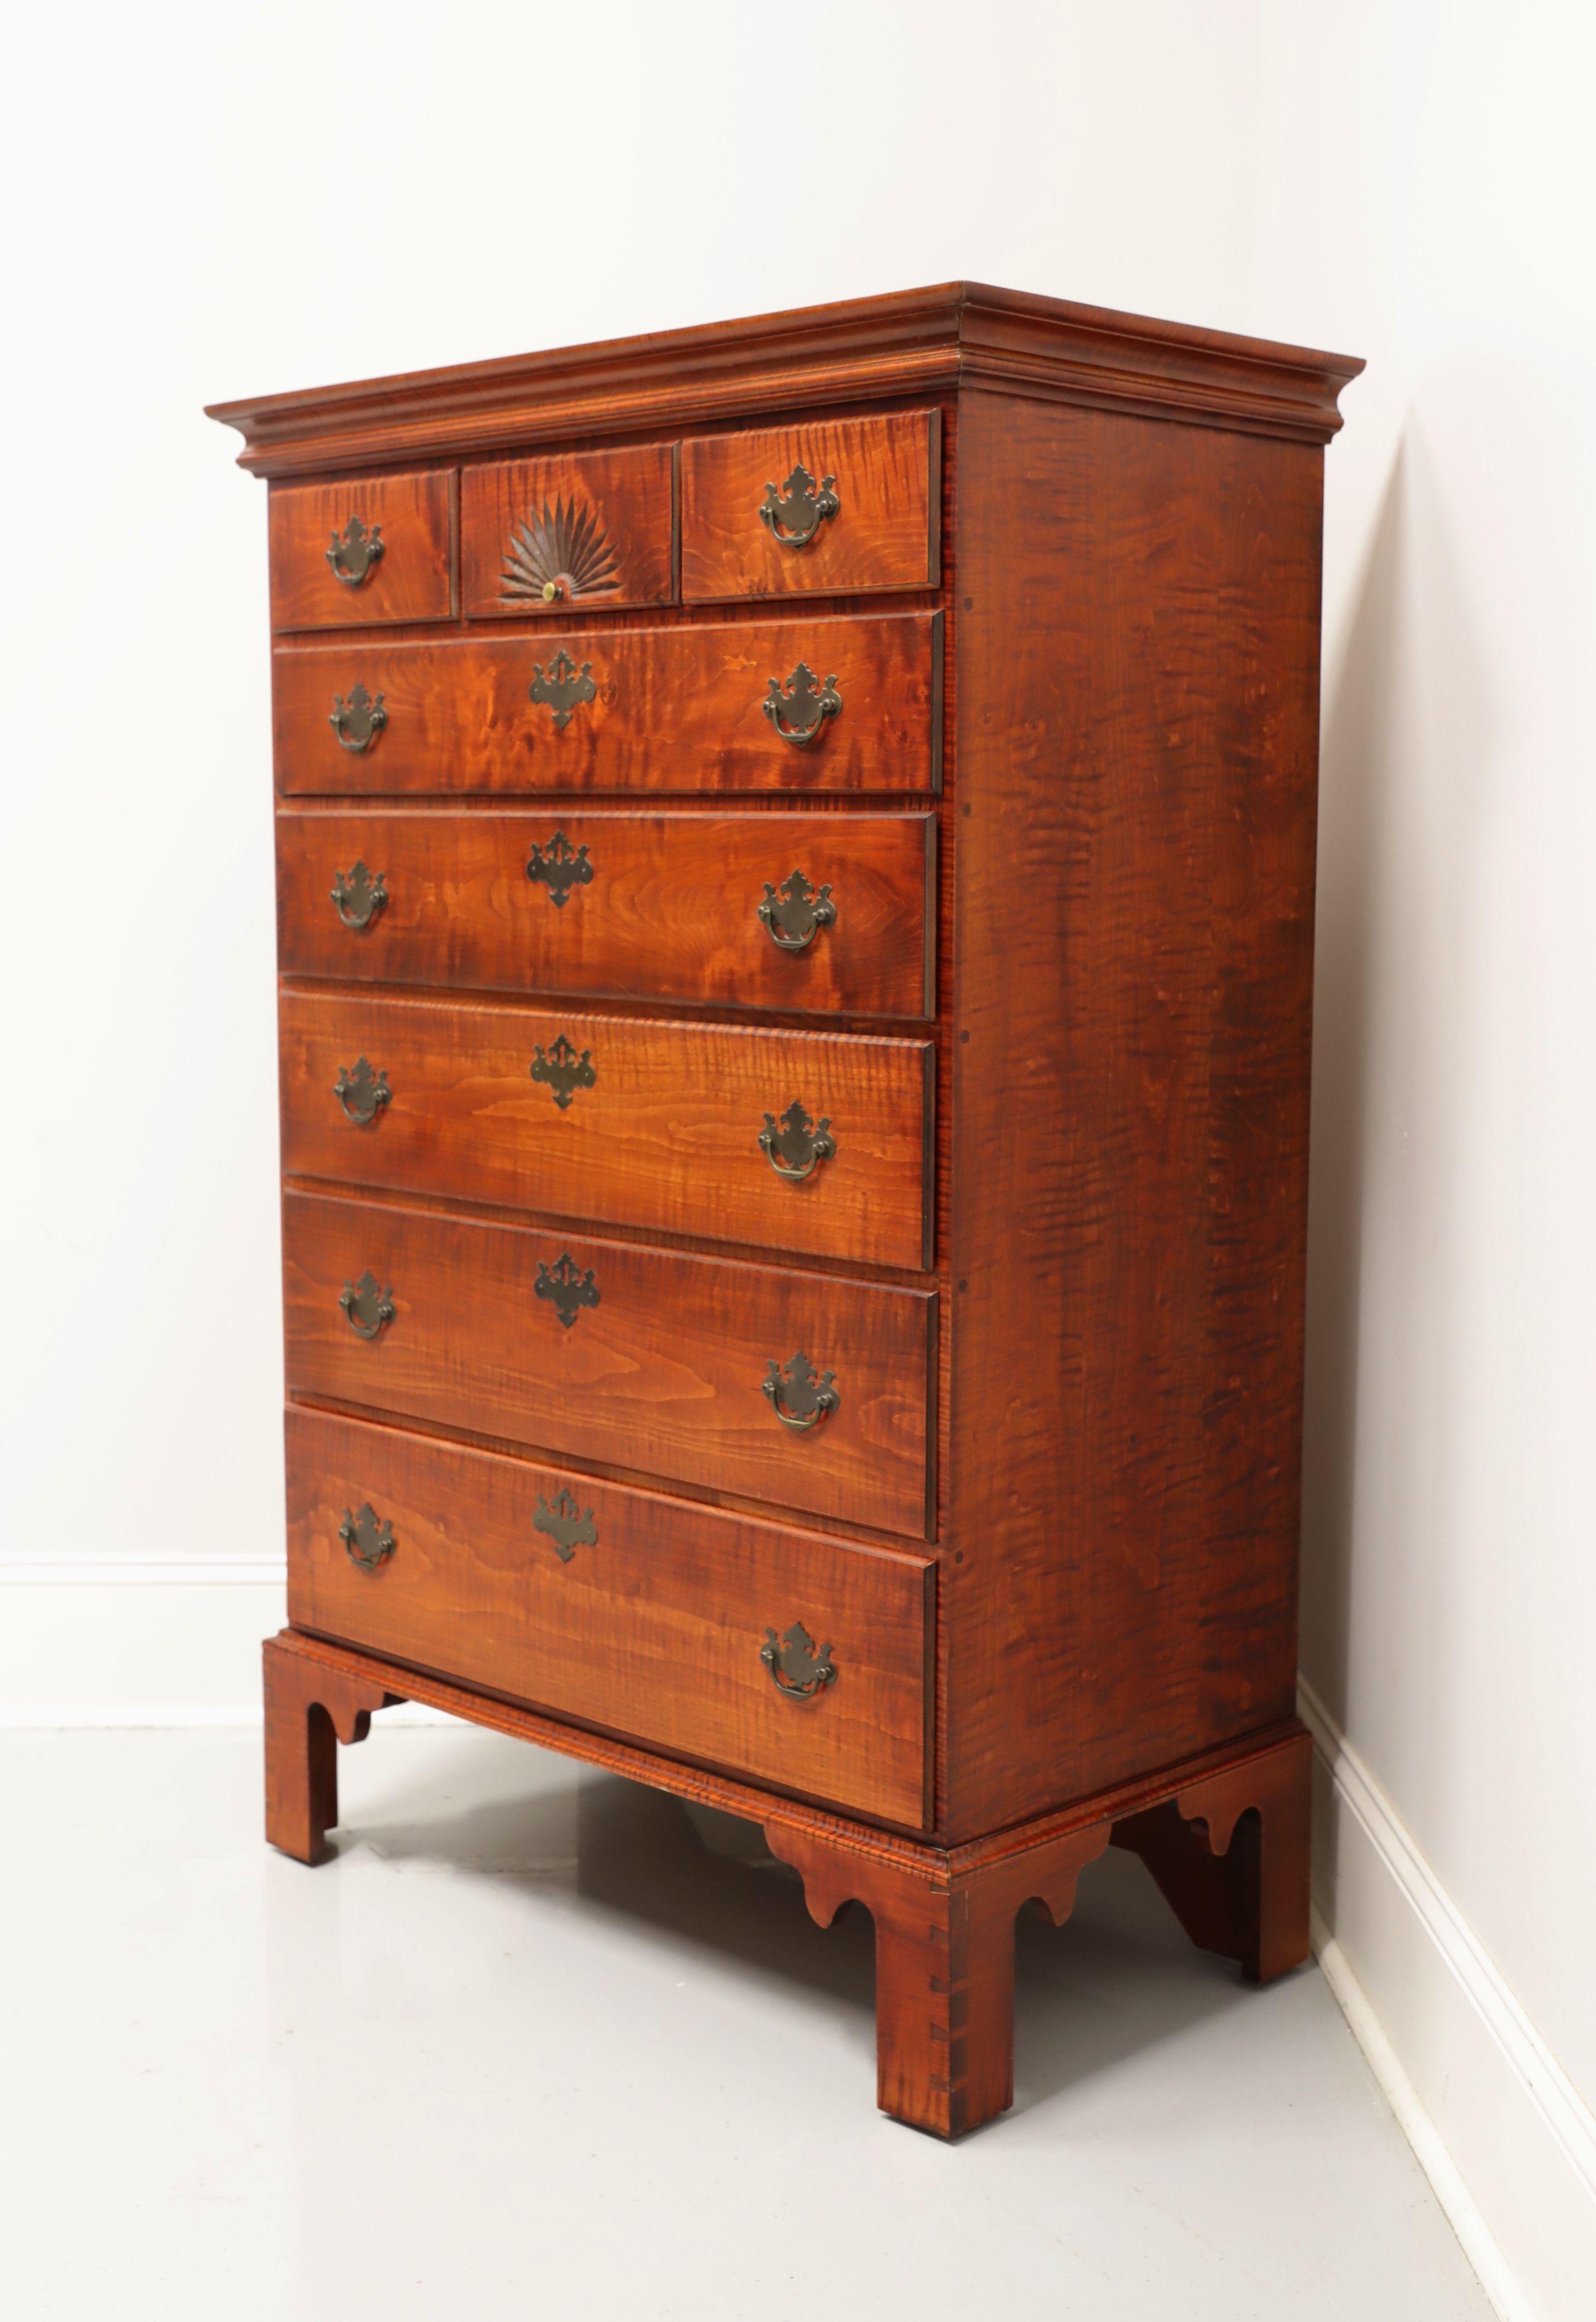 American JL TREHARN Tiger Maple Chippendale Style Tall Chest of Drawers